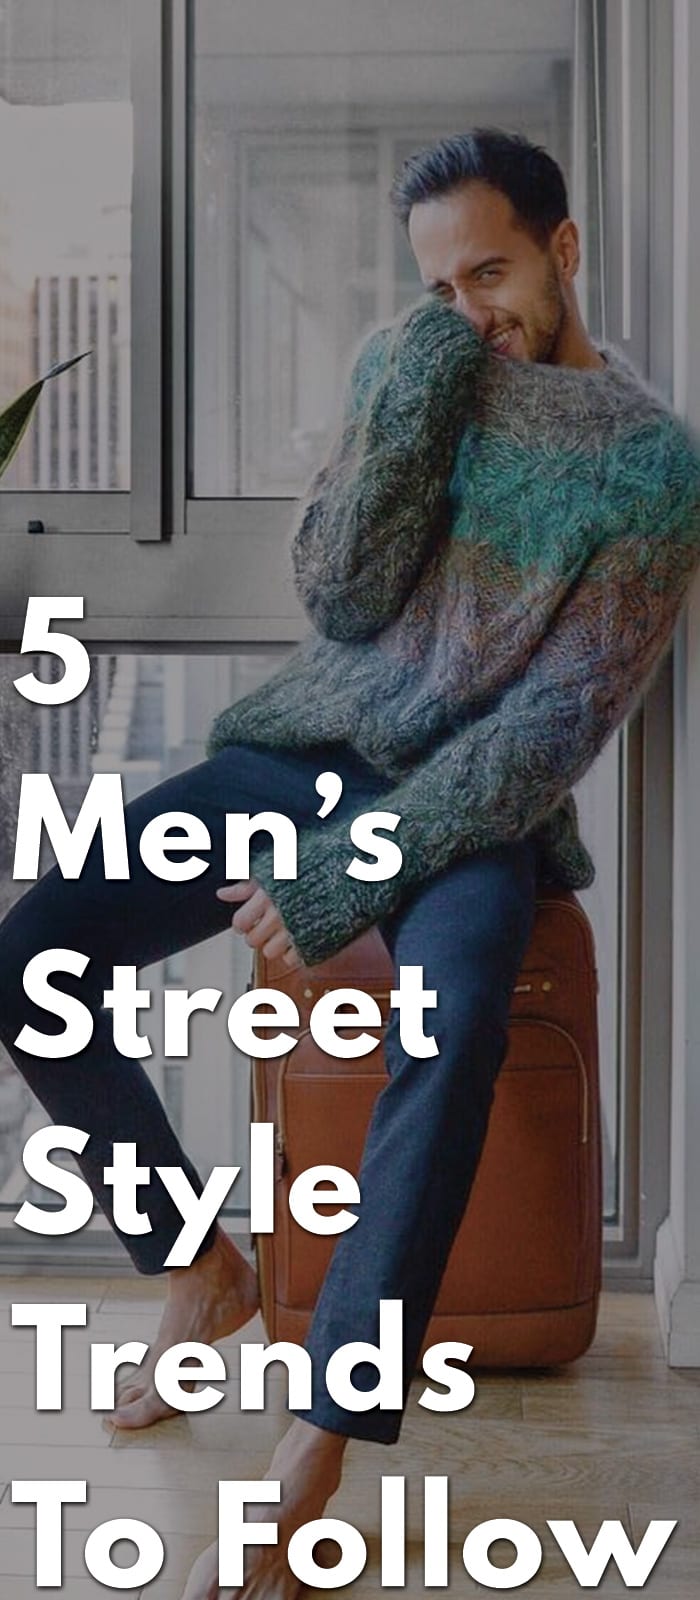 5 Men’s Street Style Trends To Follow right now